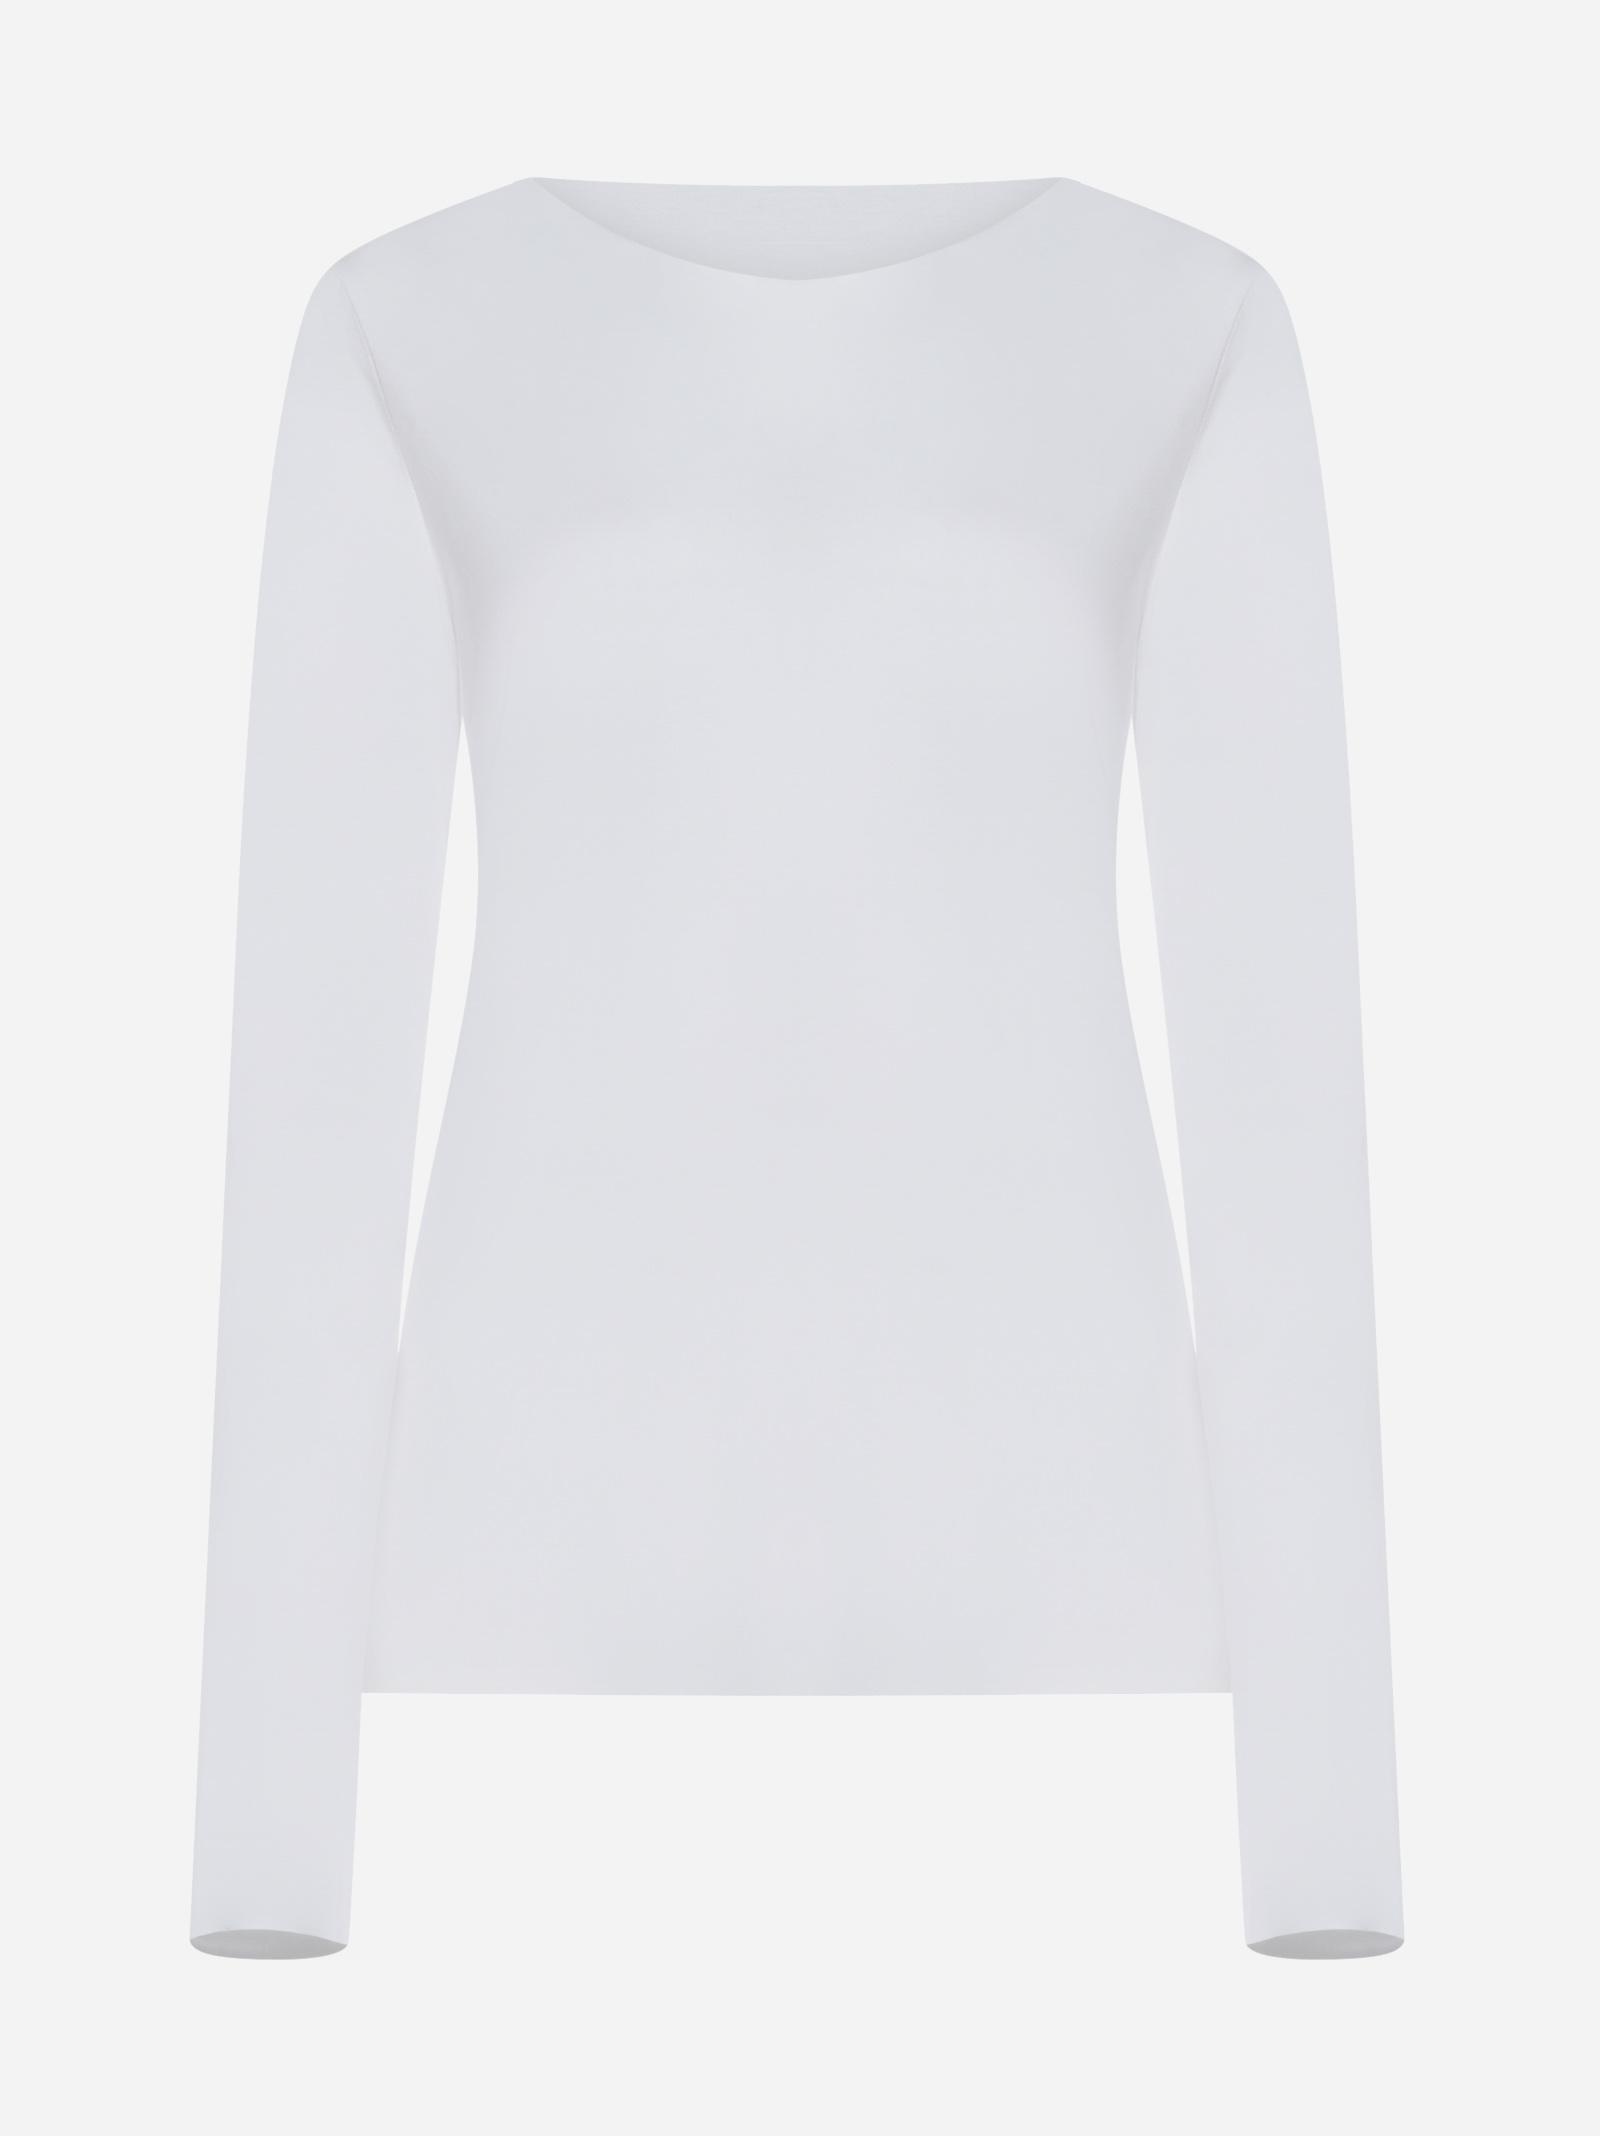 Wolford Aurora Long Sleeve V-Neck Top, Available in 2 Colors